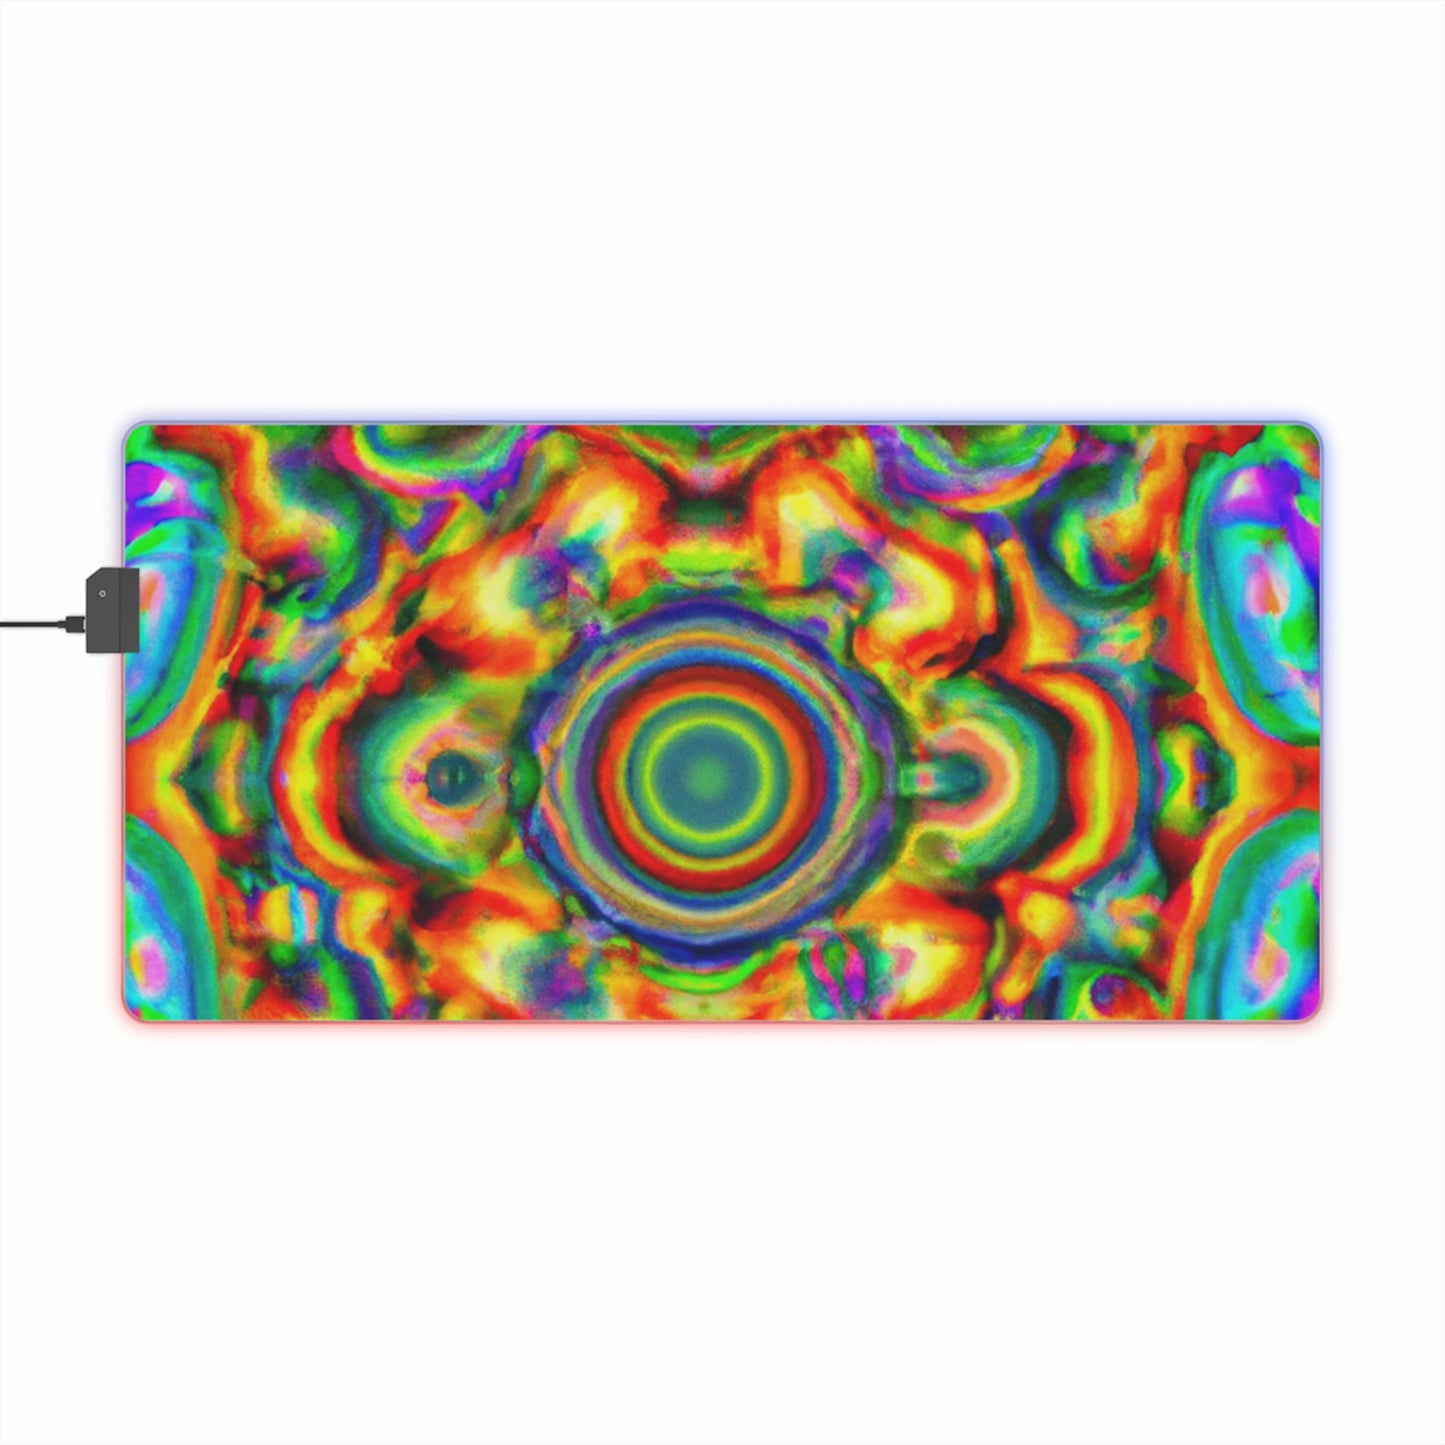 .

Freddie Fabulous - Psychedelic Trippy LED Light Up Gaming Mouse Pad